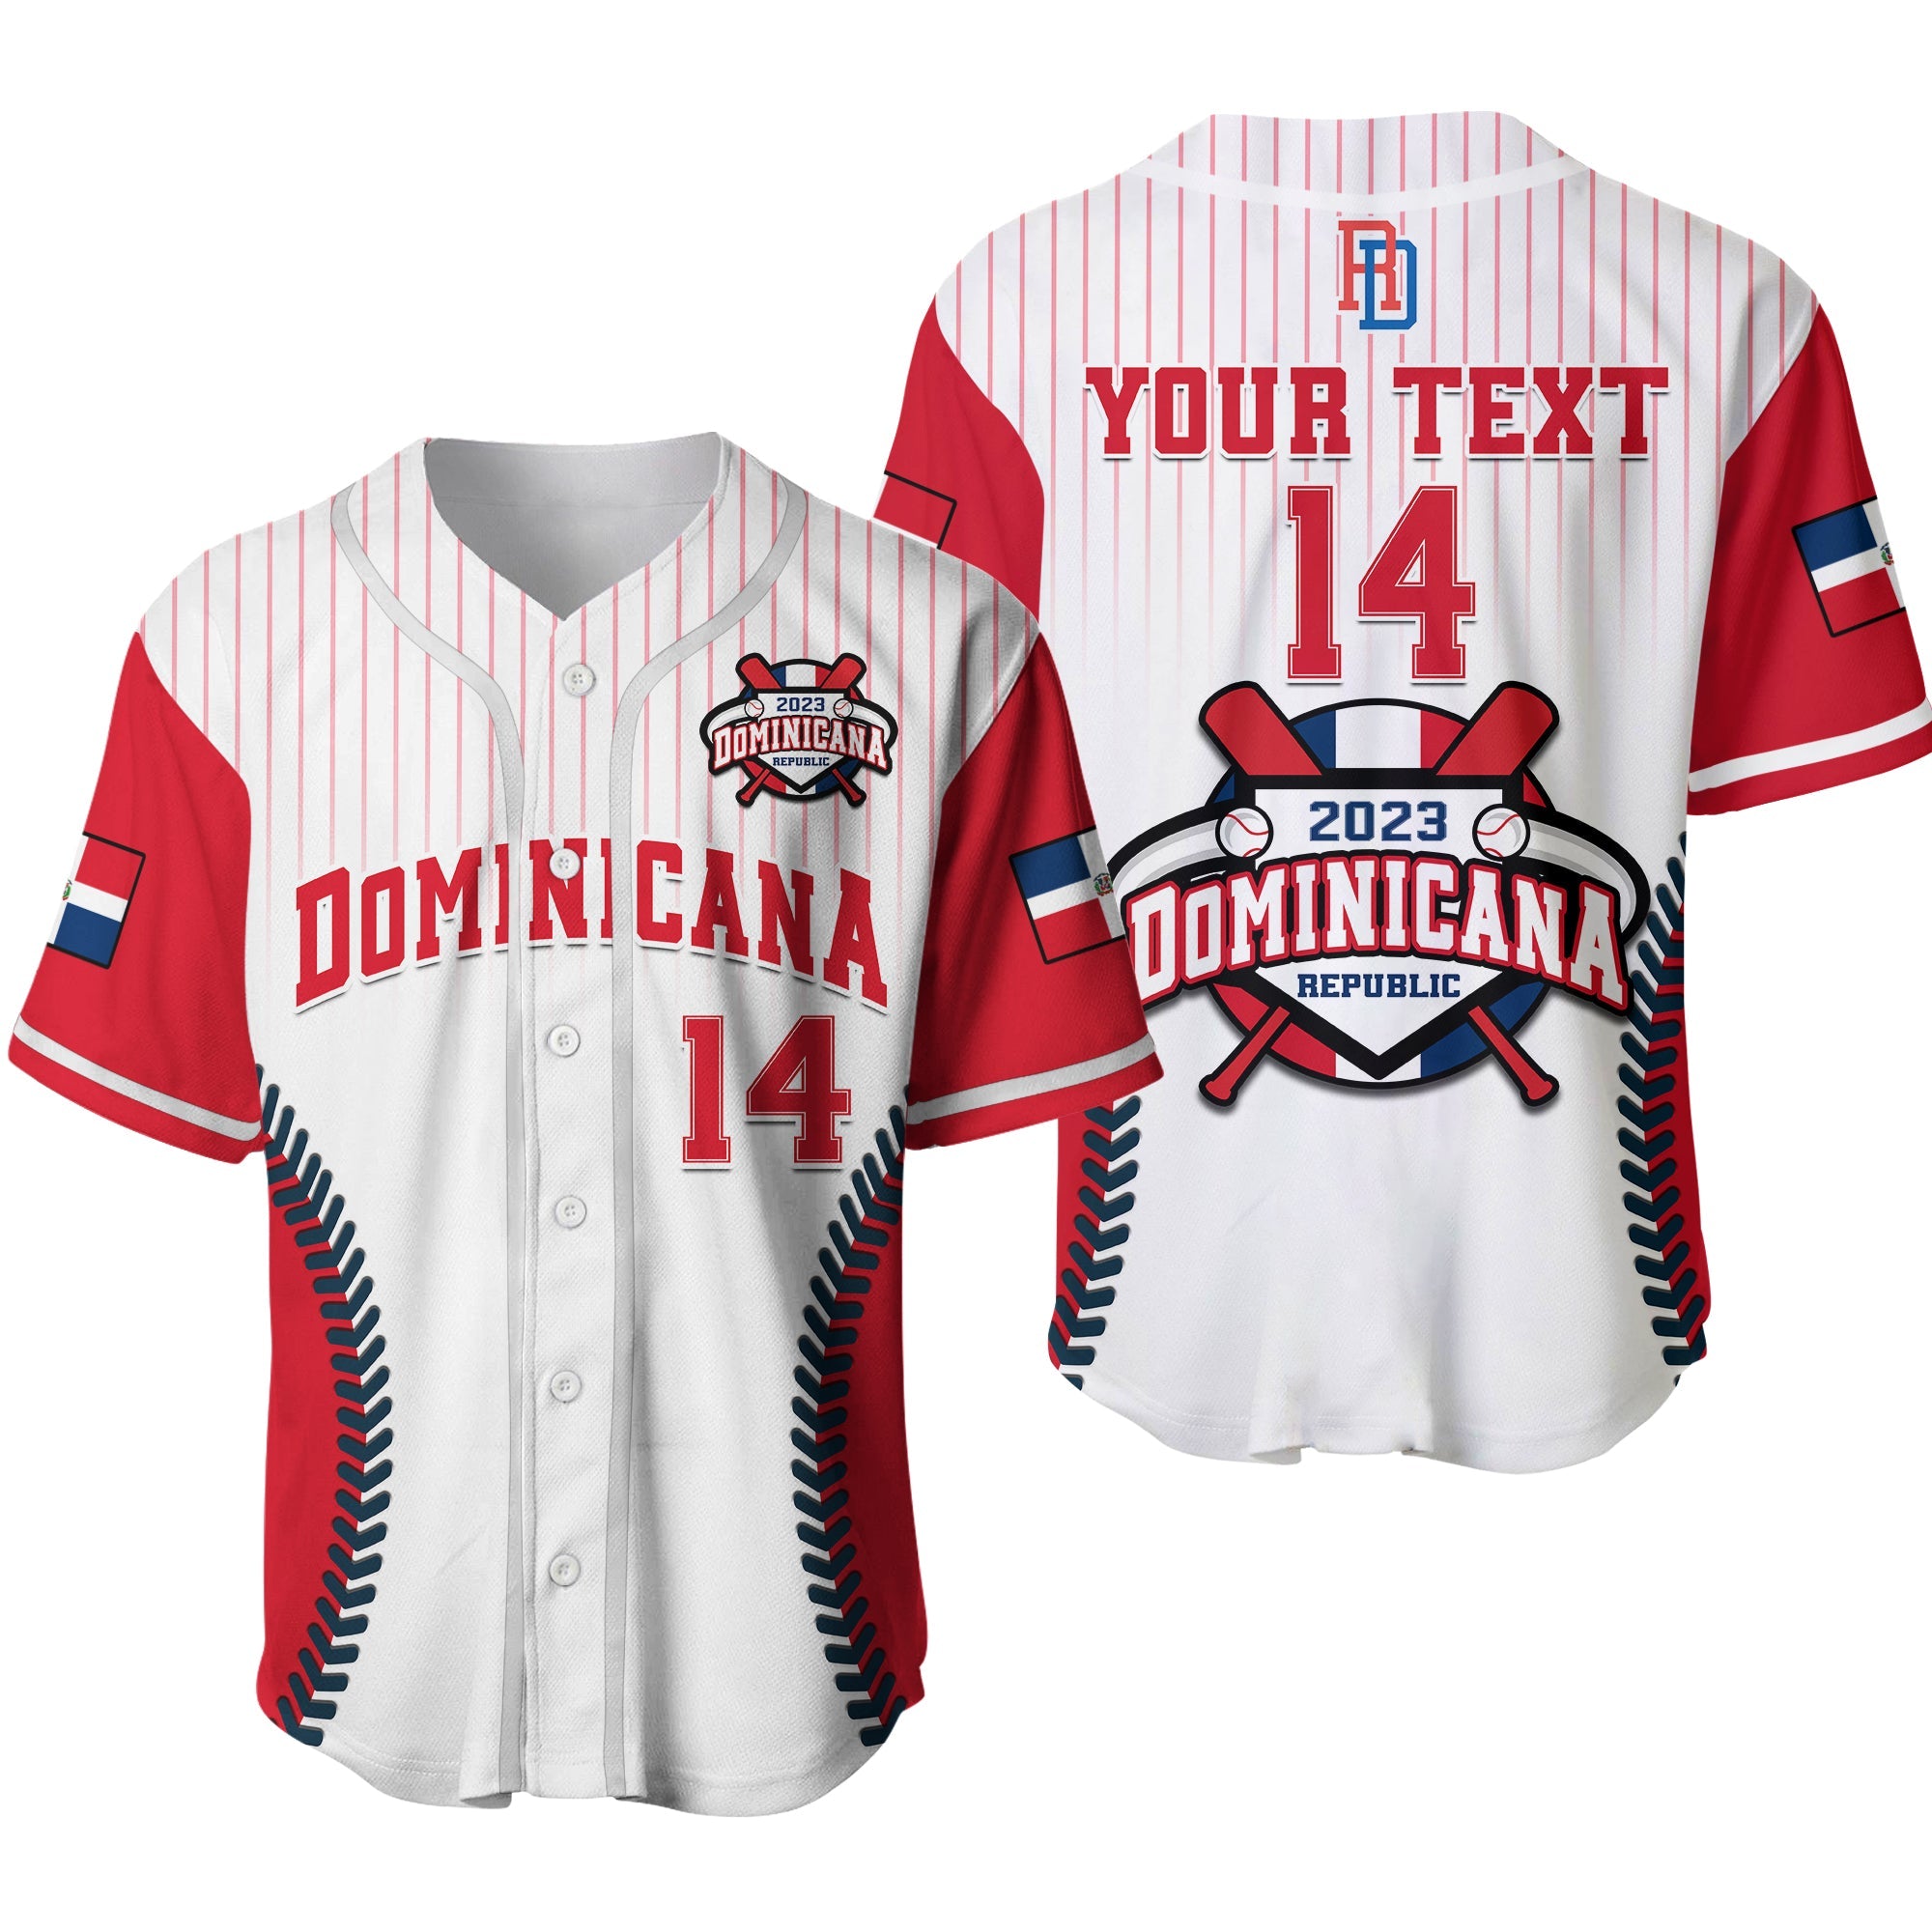 custom-text-and-number-dominican-republic-baseball-2023-baseball-jersey-version-white-ver02